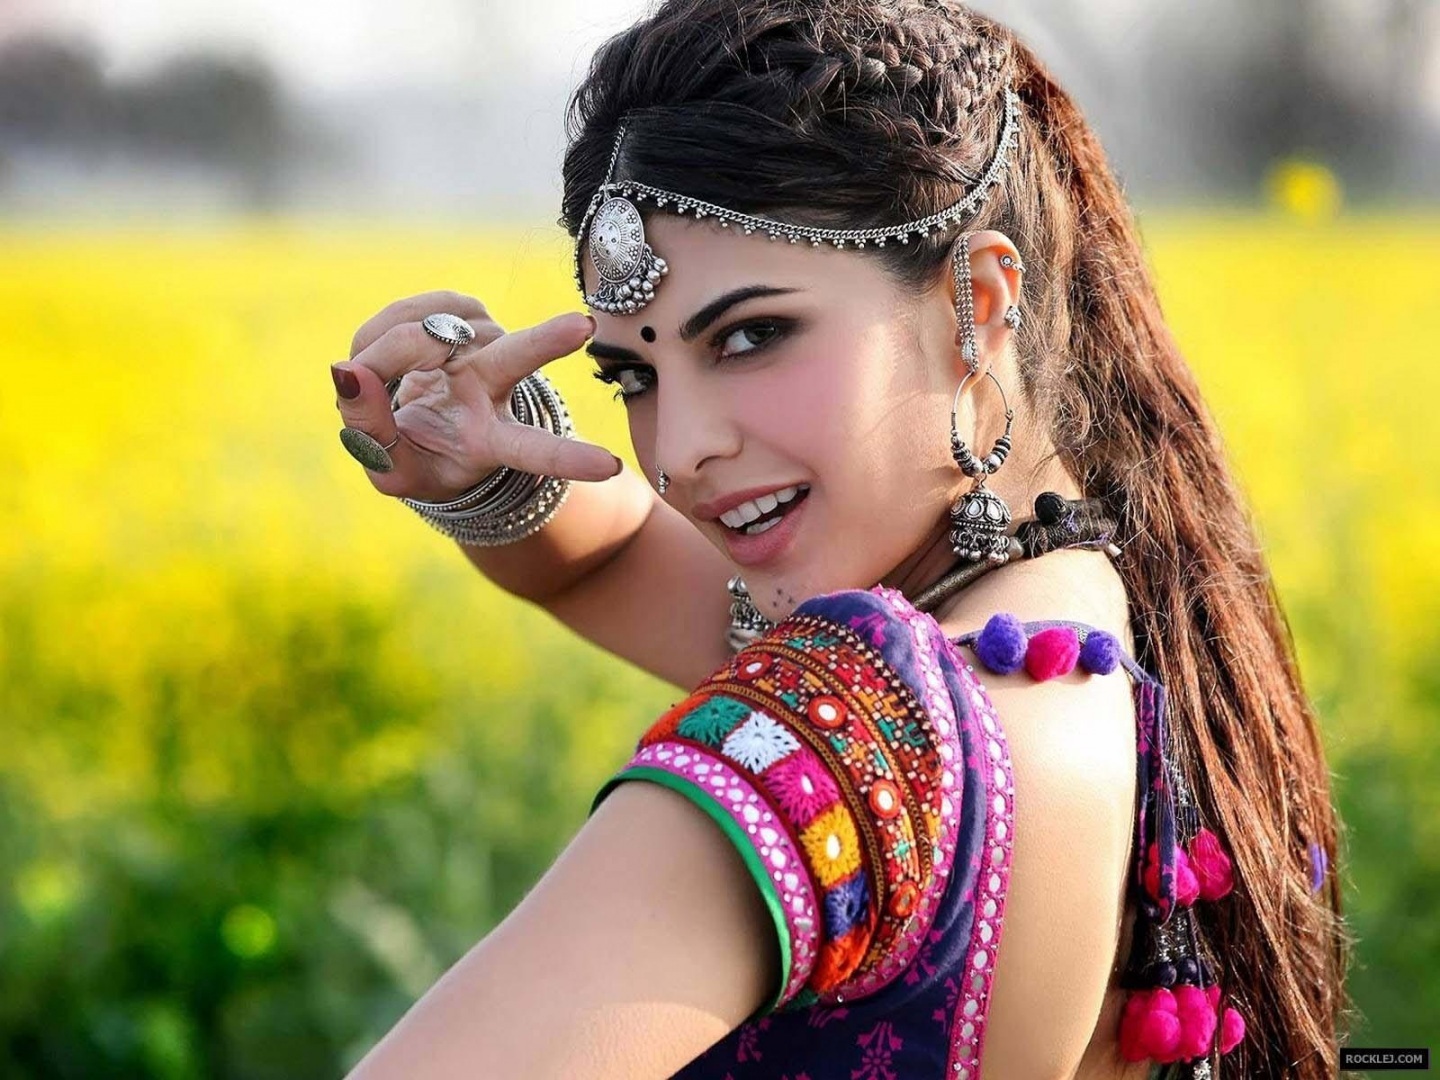 Awesome Punjabi Girls Wallpaper HD Pictures Live